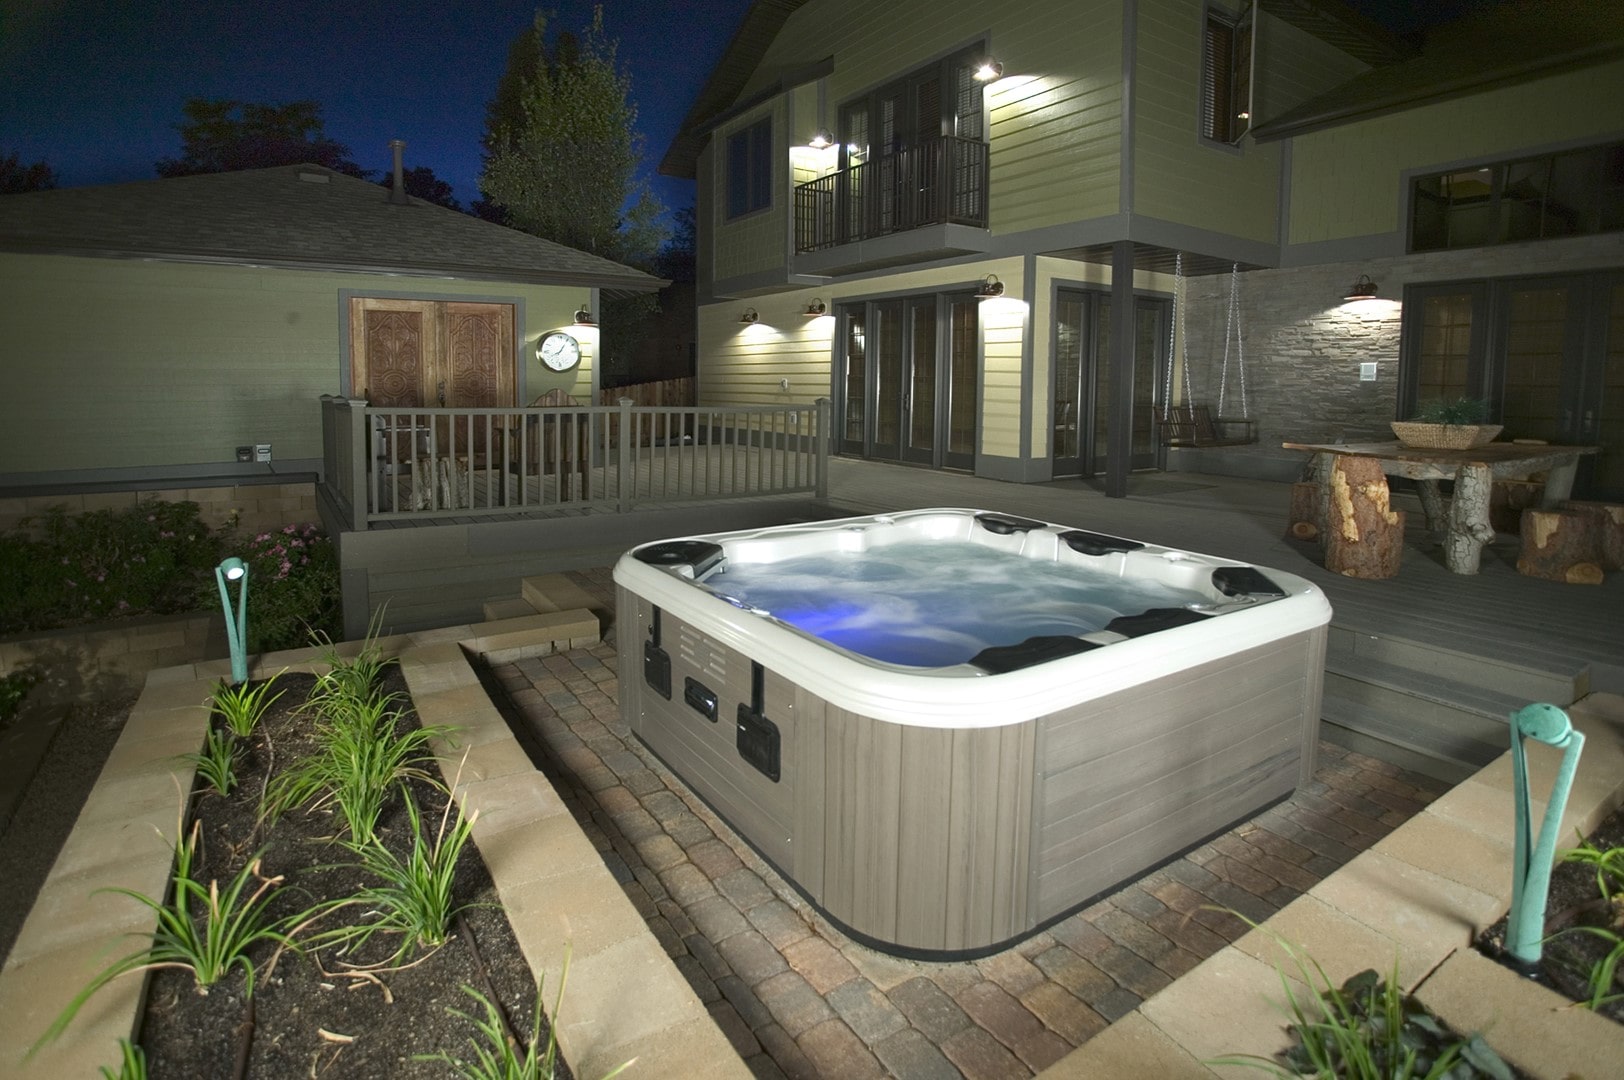 What Should You Put Under A Hot Tub